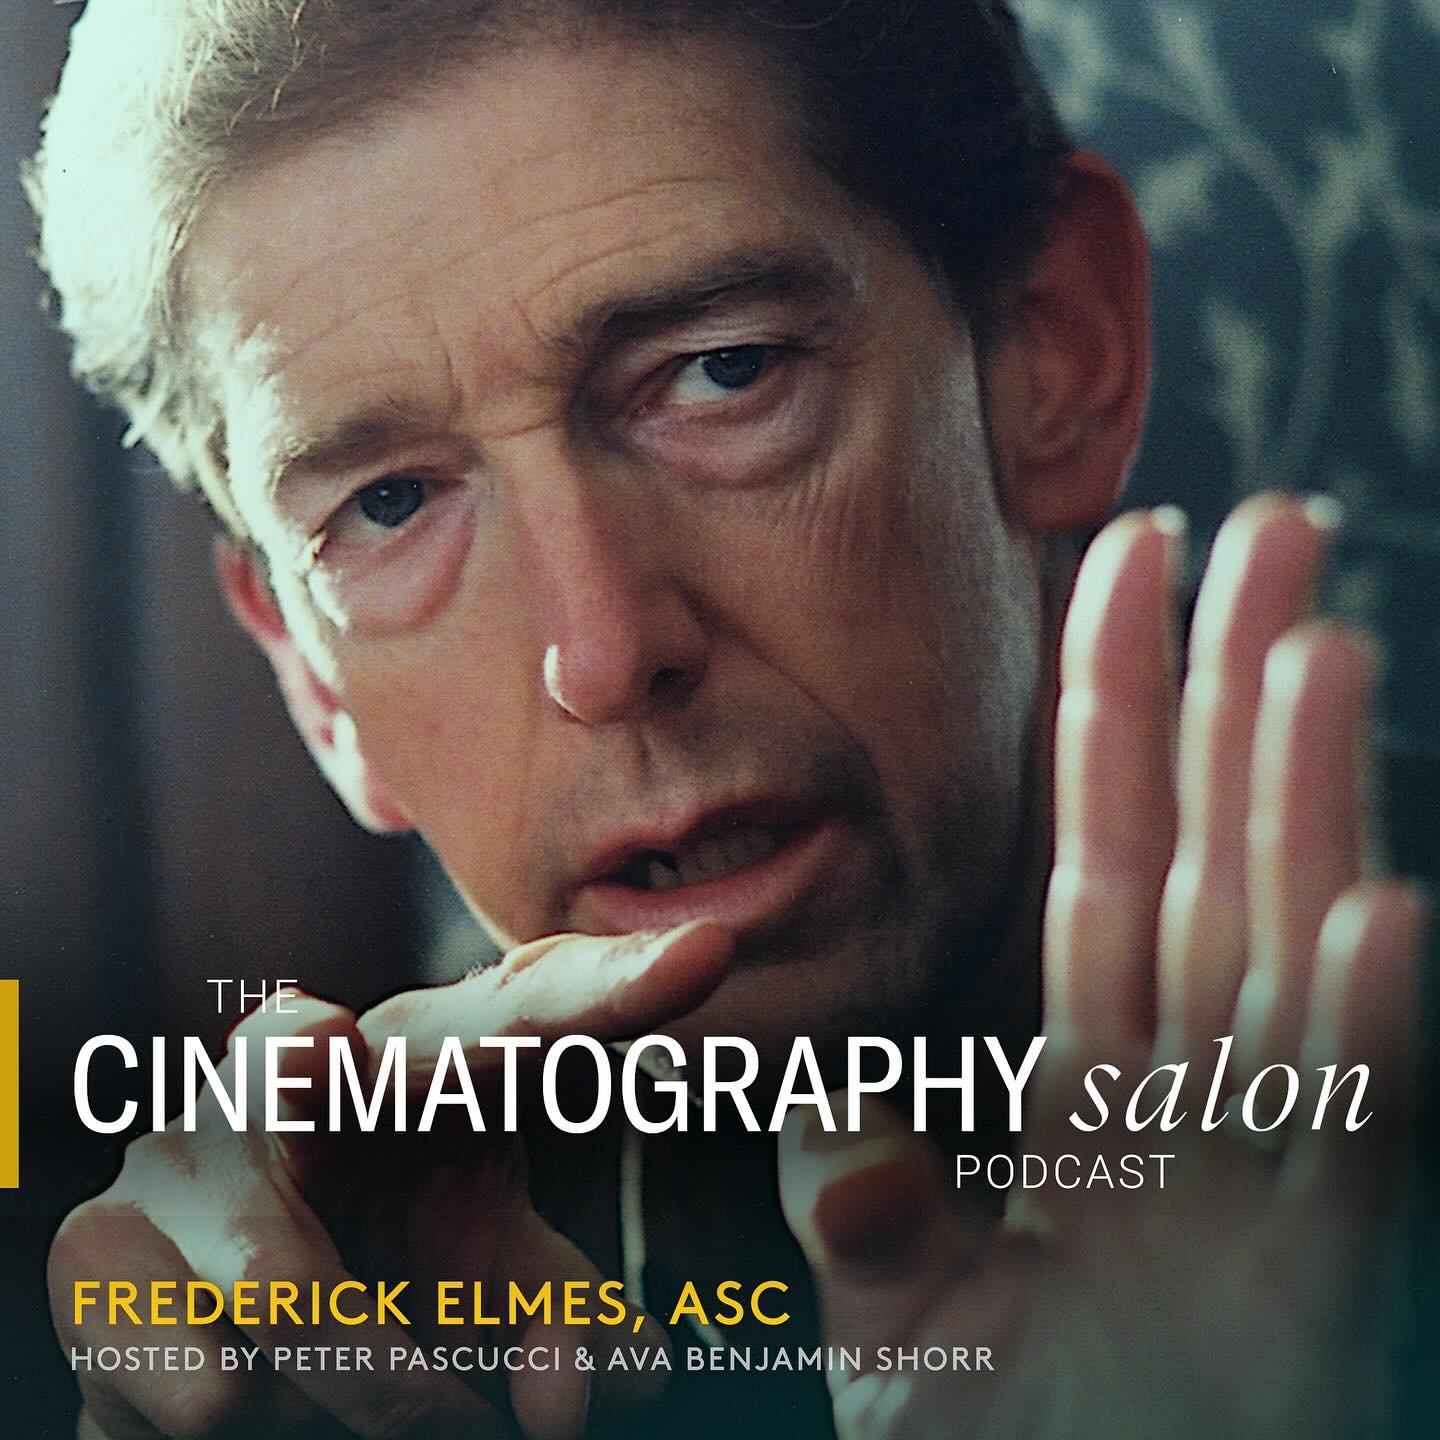 🎥🎥🎥LINK IN BIO🎥🎥🎥

Frederick Elmes, ASC: Reinventing Yourself, One Visionary Film at a Time

In the latest installment of the &ldquo;Cinematography Salon Podcast,&rdquo; we sit down with renowned cinematographer Frederick Elmes, ASC, whose care